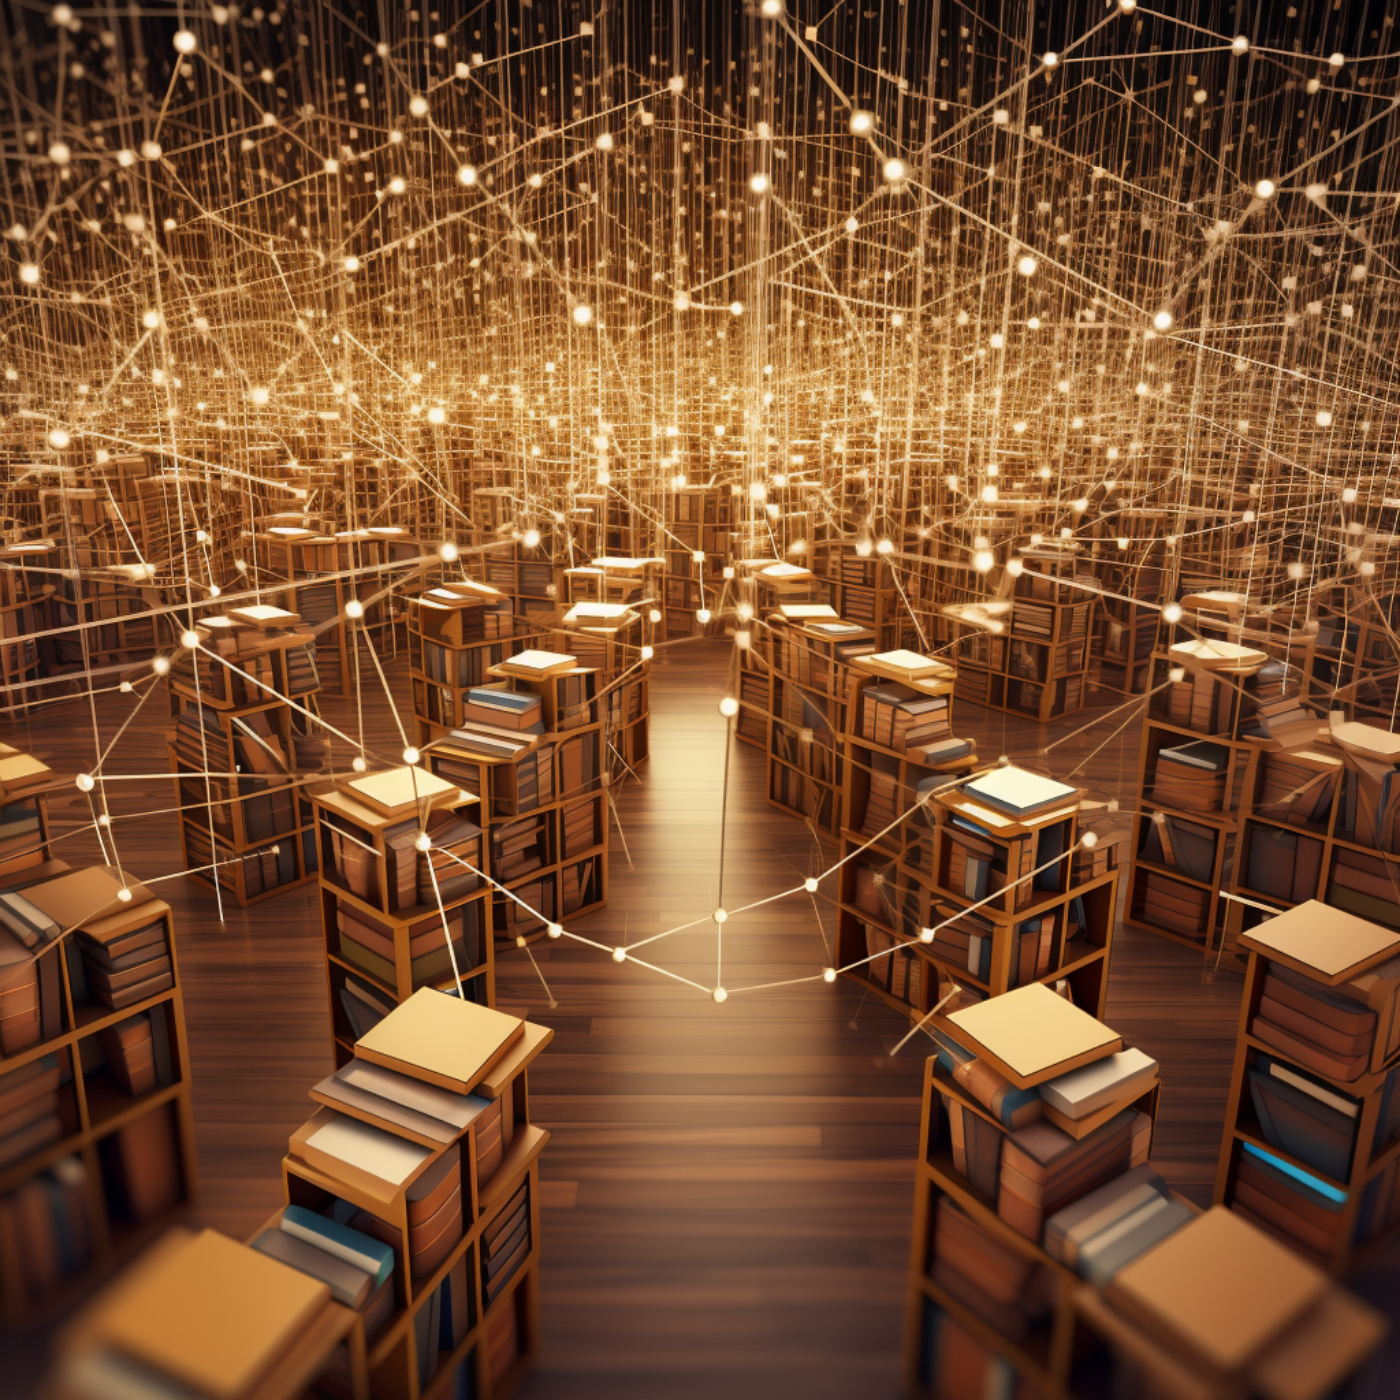 desks with books with a neural network lit up above in lights